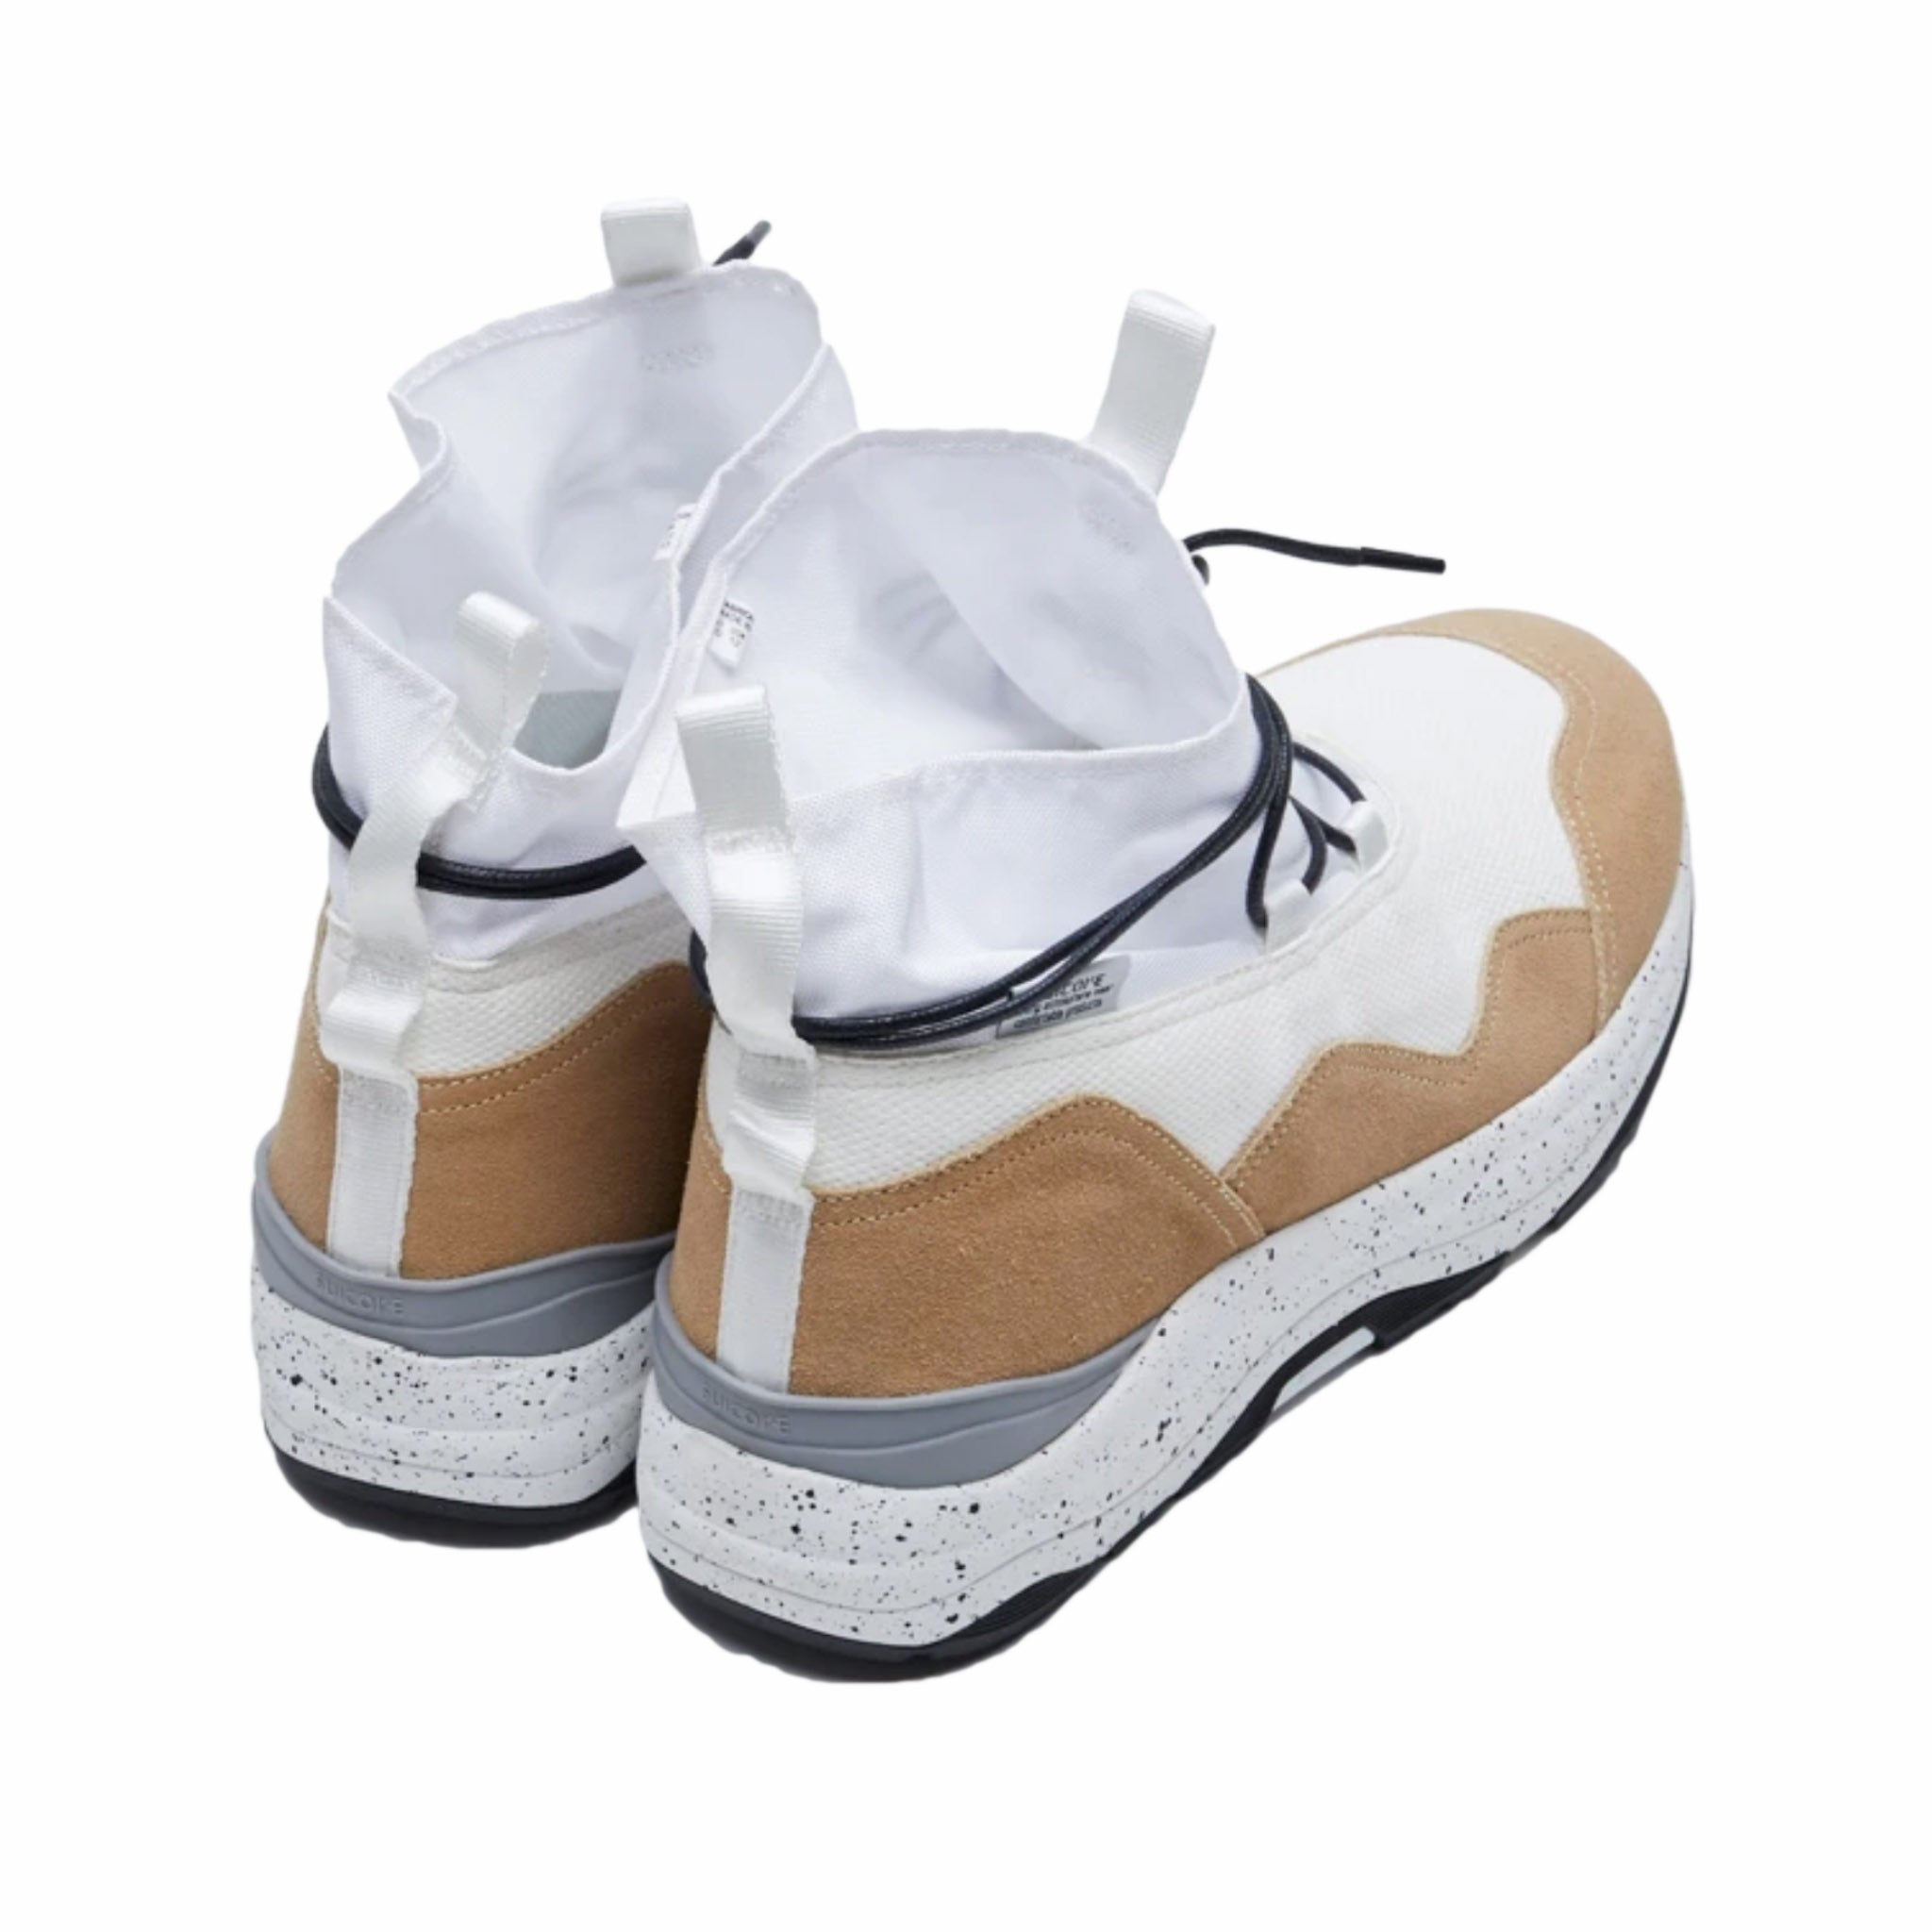 Suicoke ROBBS-ab Boots (White/Beige) – August